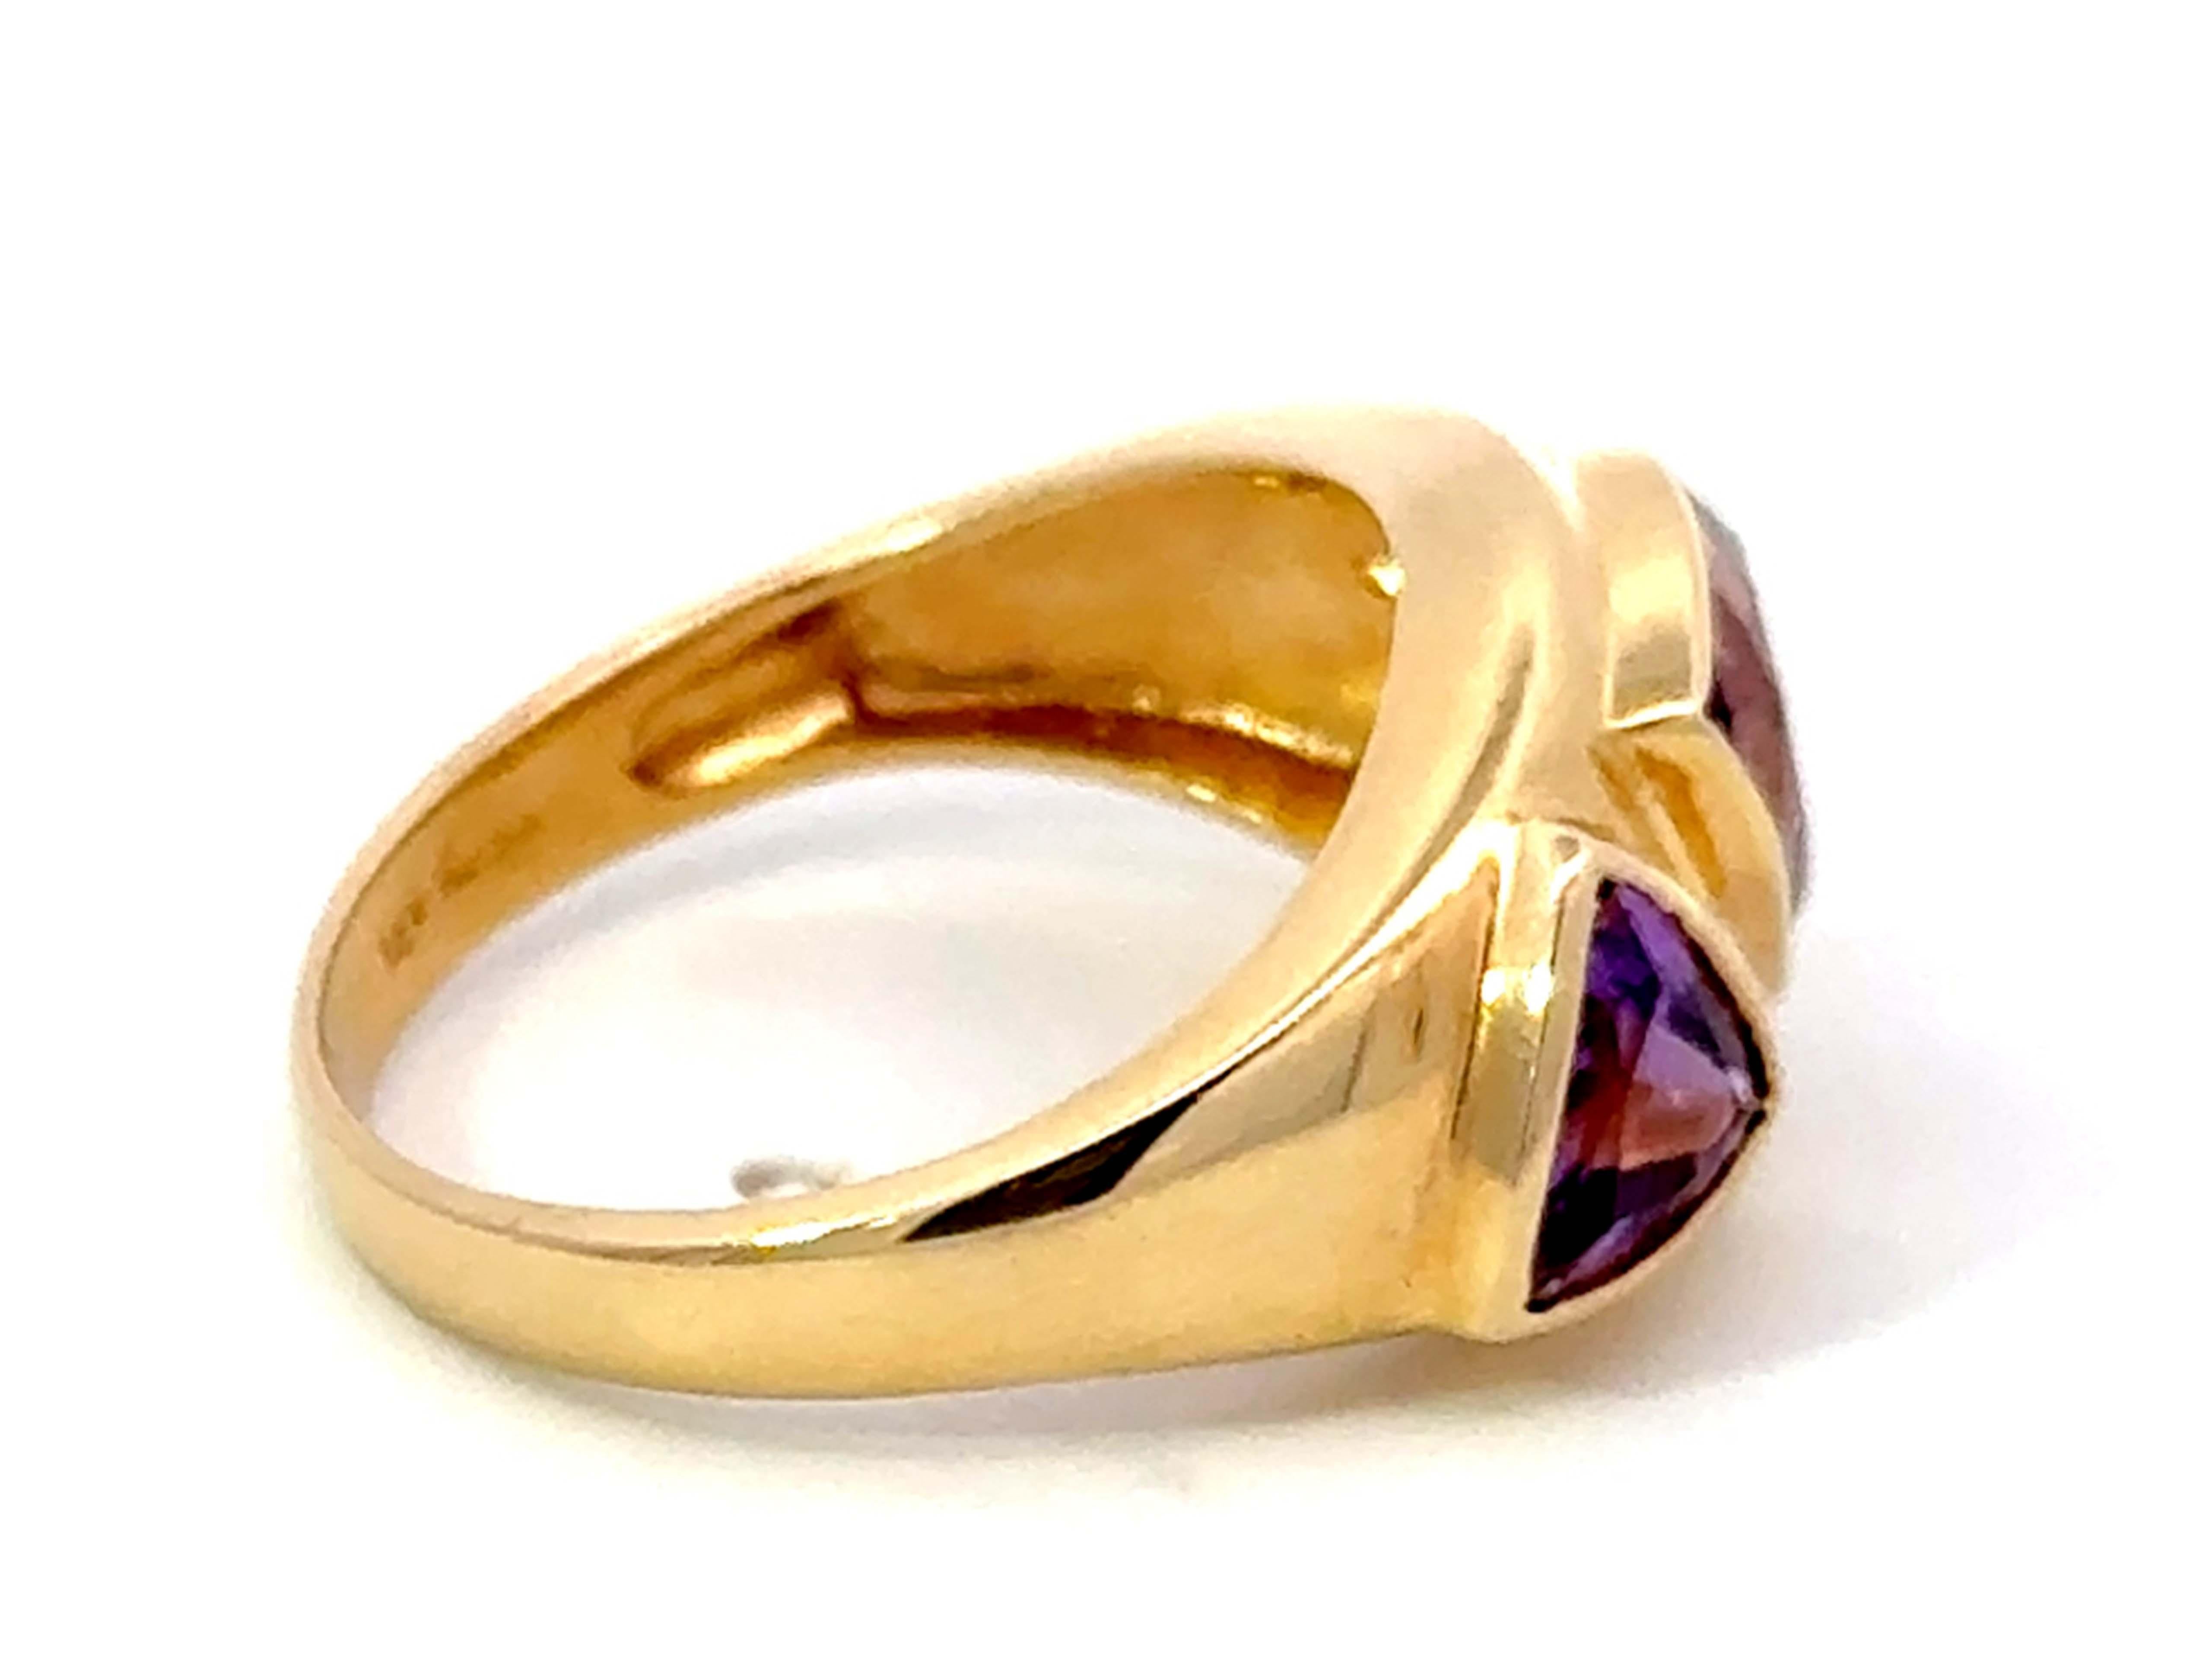 Trillion Purple Amethyst Diamond Band Ring 14k Yellow Gold In Excellent Condition For Sale In Honolulu, HI